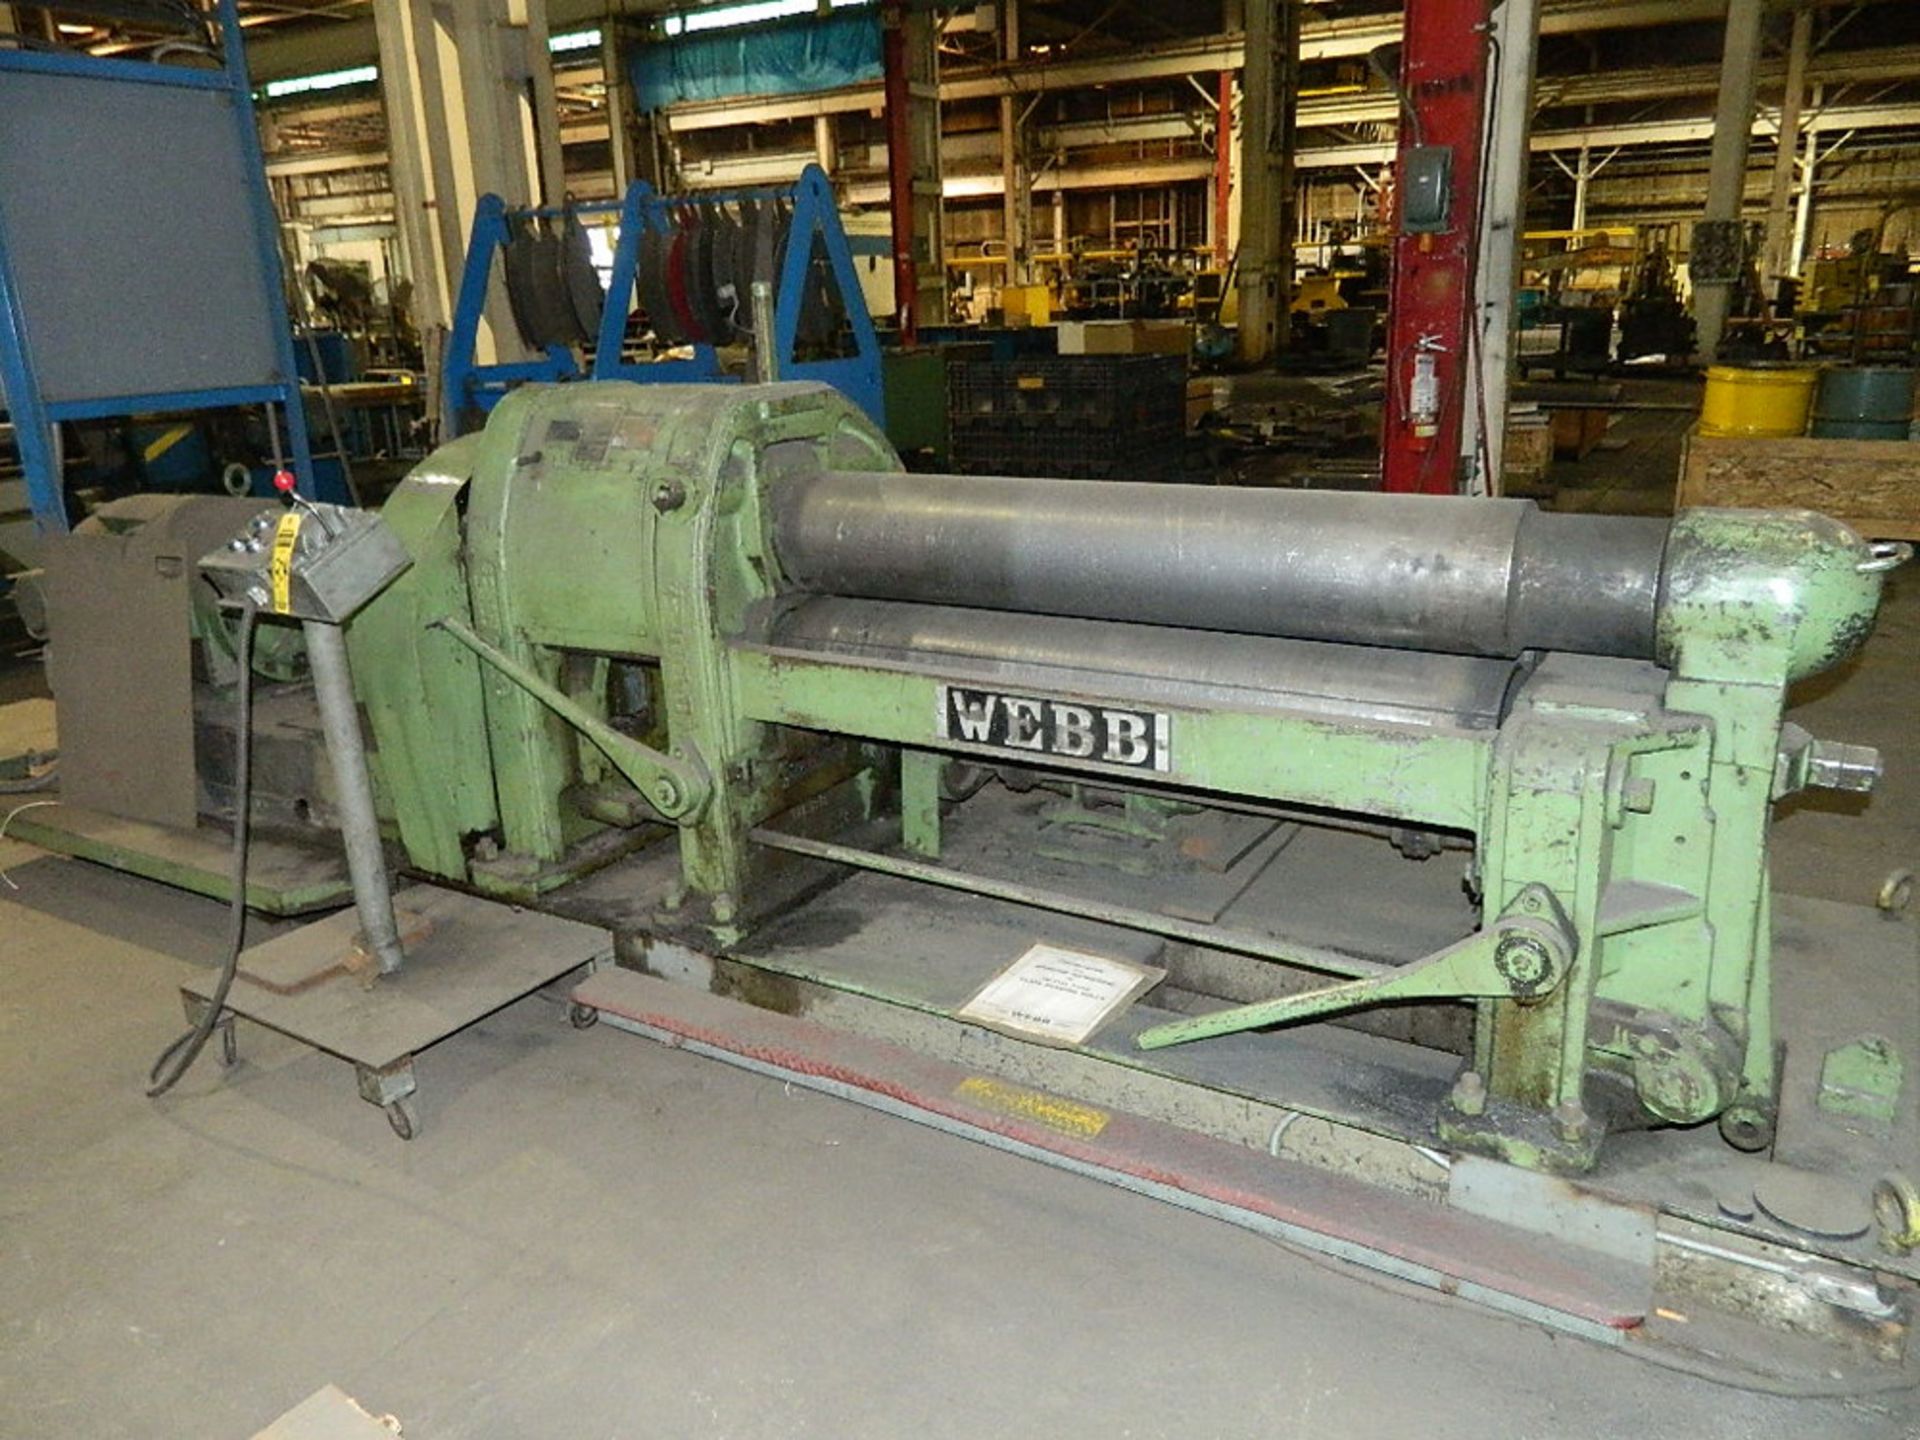 Webb Initial Pinch Power Roll, 5/8" x 4', Mdl: 6L, S/N: 53122 - Painesville, OH - 7262P - Image 2 of 2